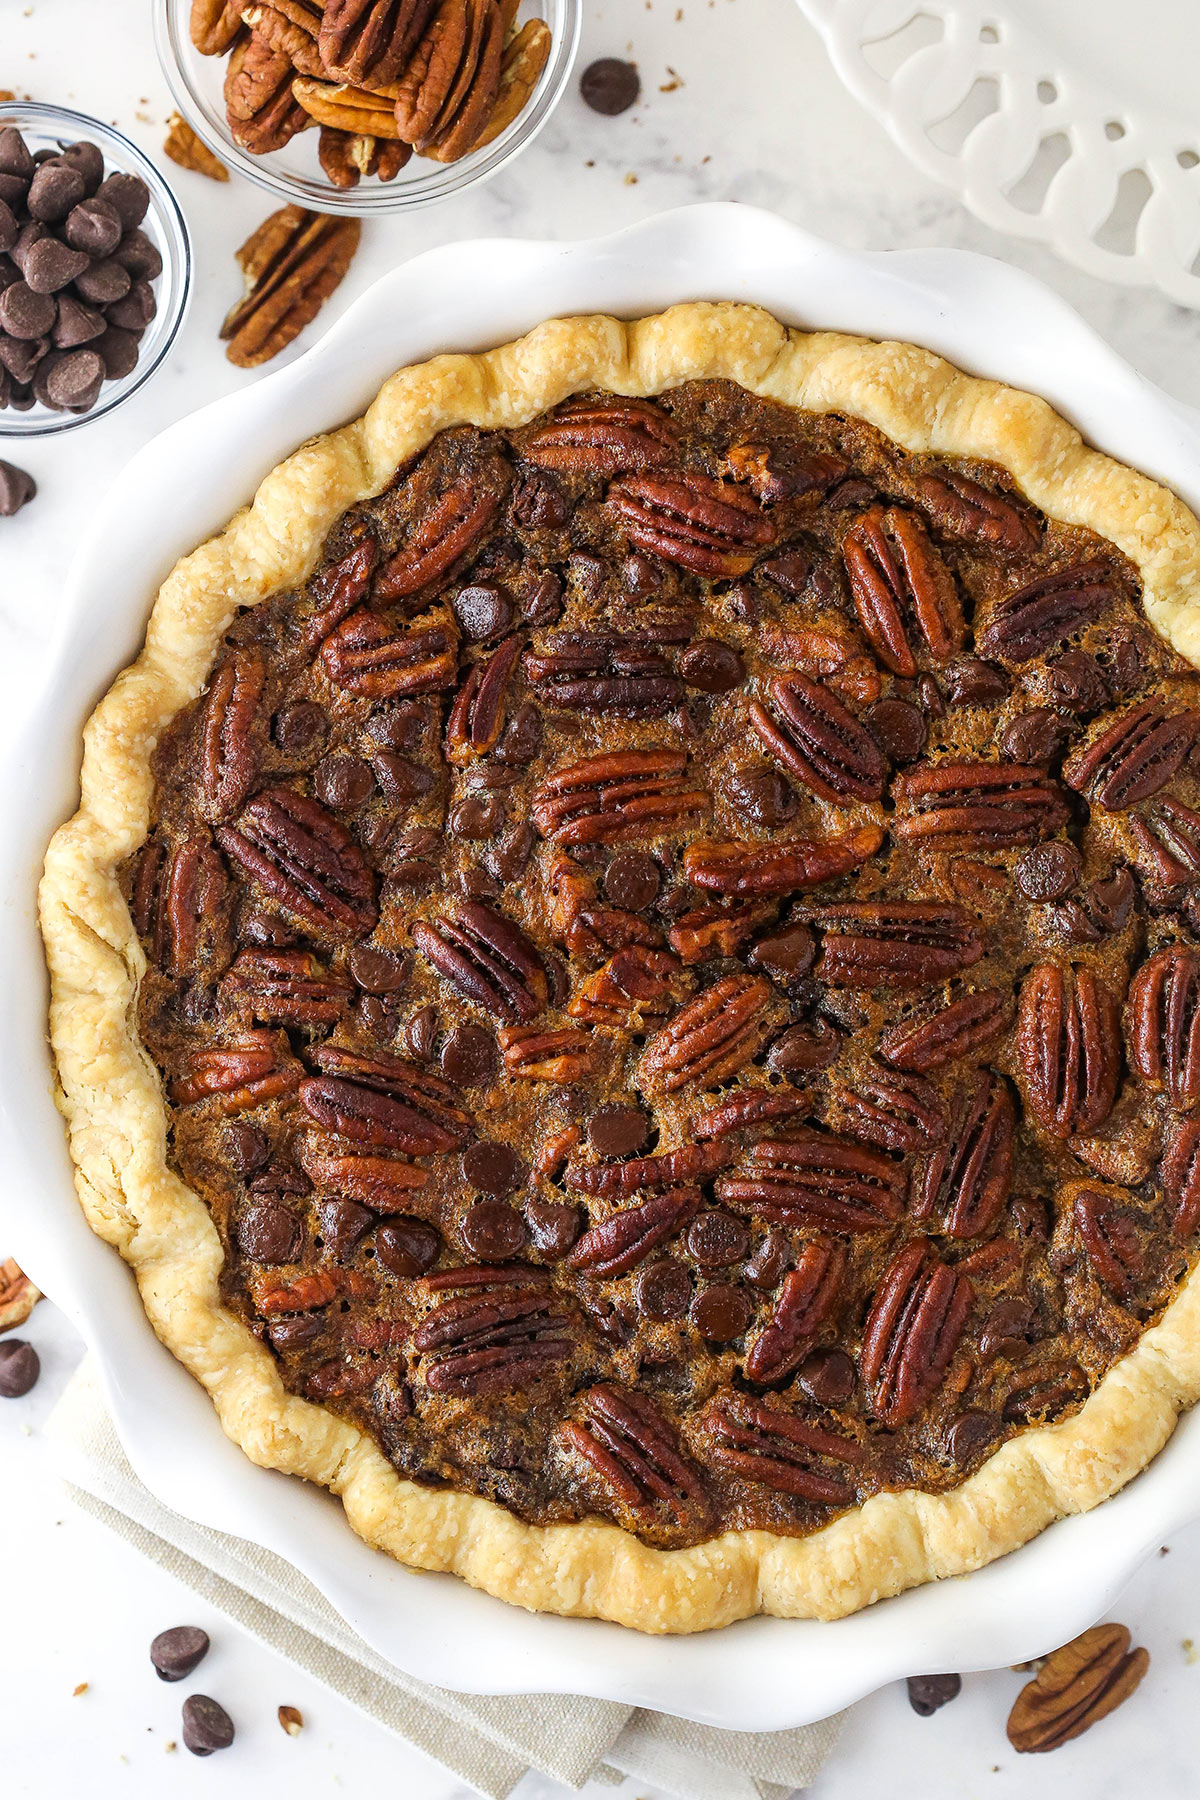 Overhead image of chocolate pecan pie in a pie dish.